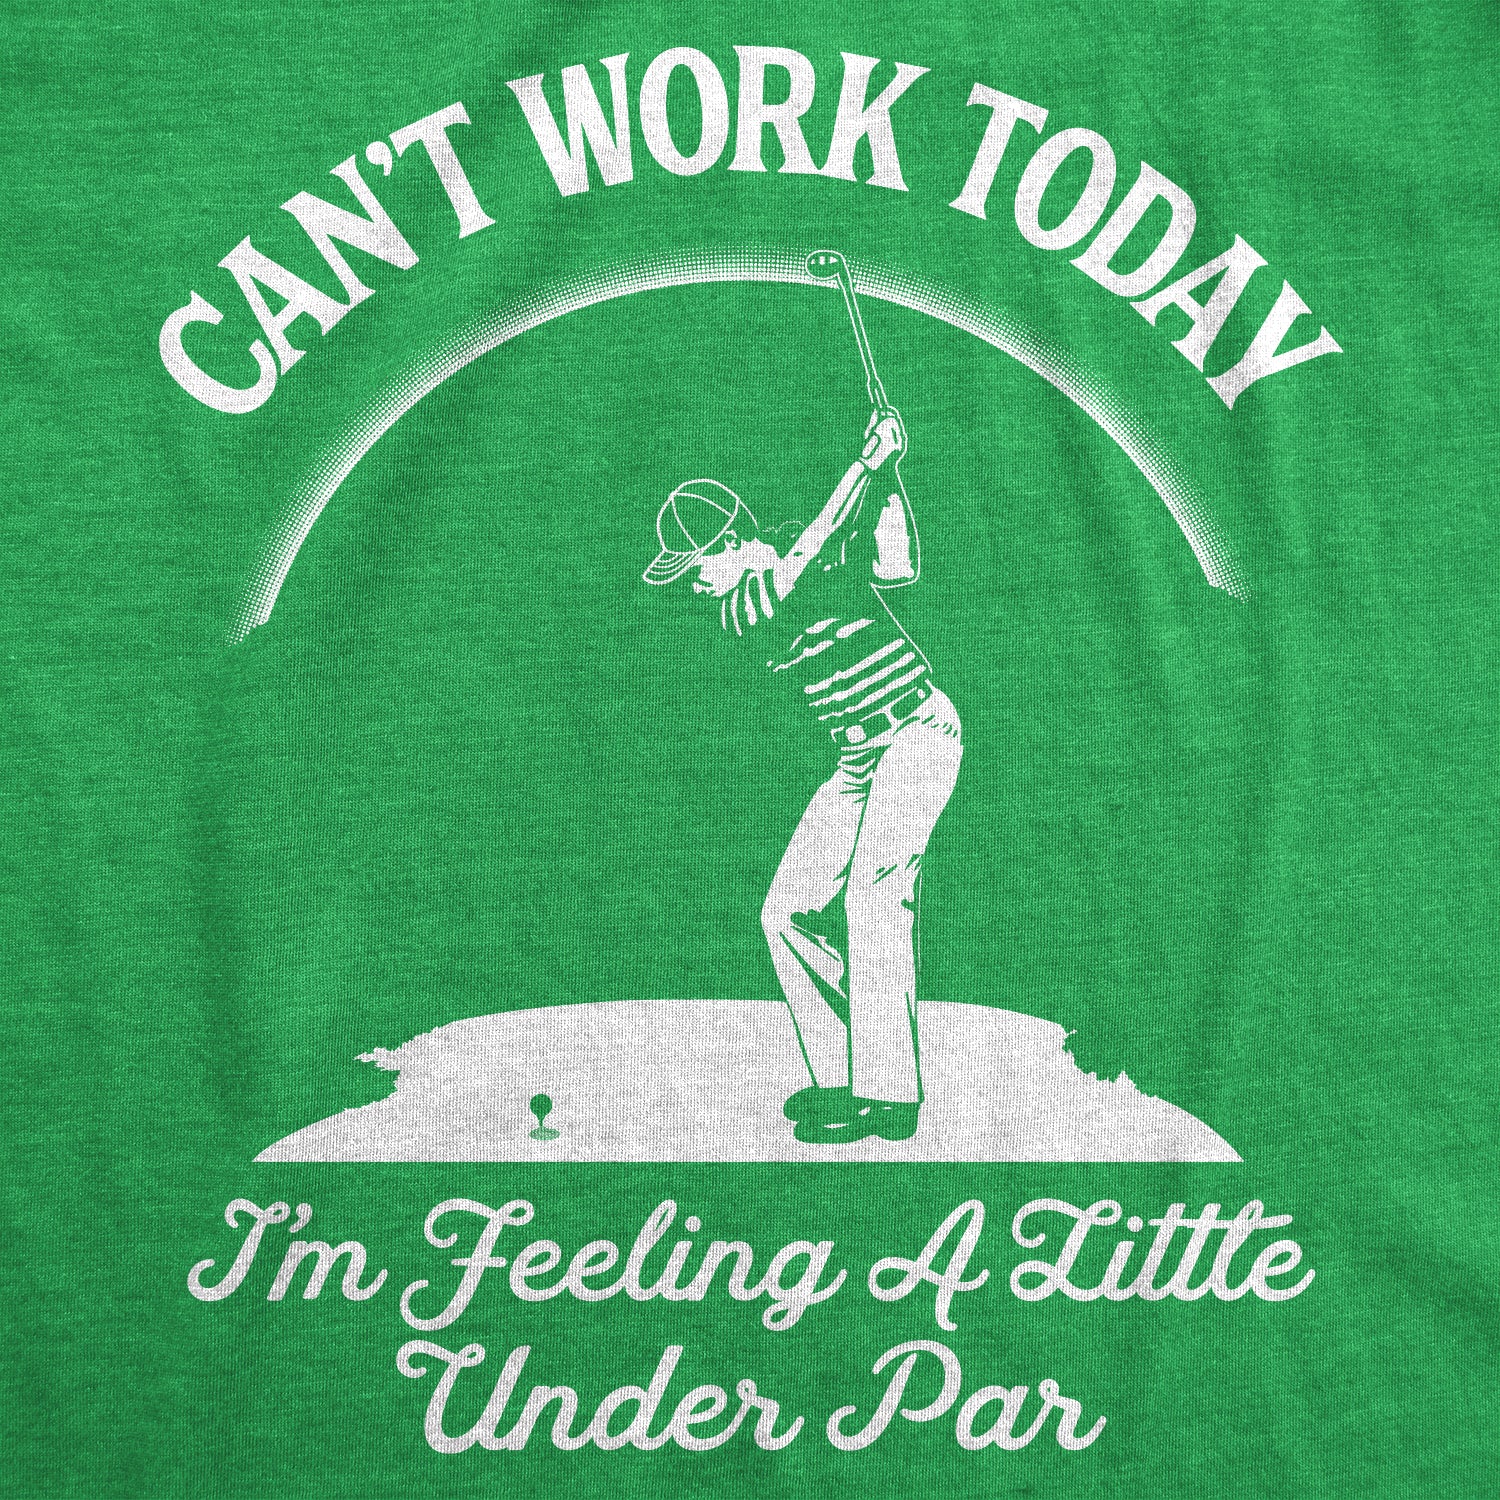 Funny Heather Green - Under Par Can't Work Today I'm Feeling A Little Under Par Mens T Shirt Nerdy Father's Day Golf Tee